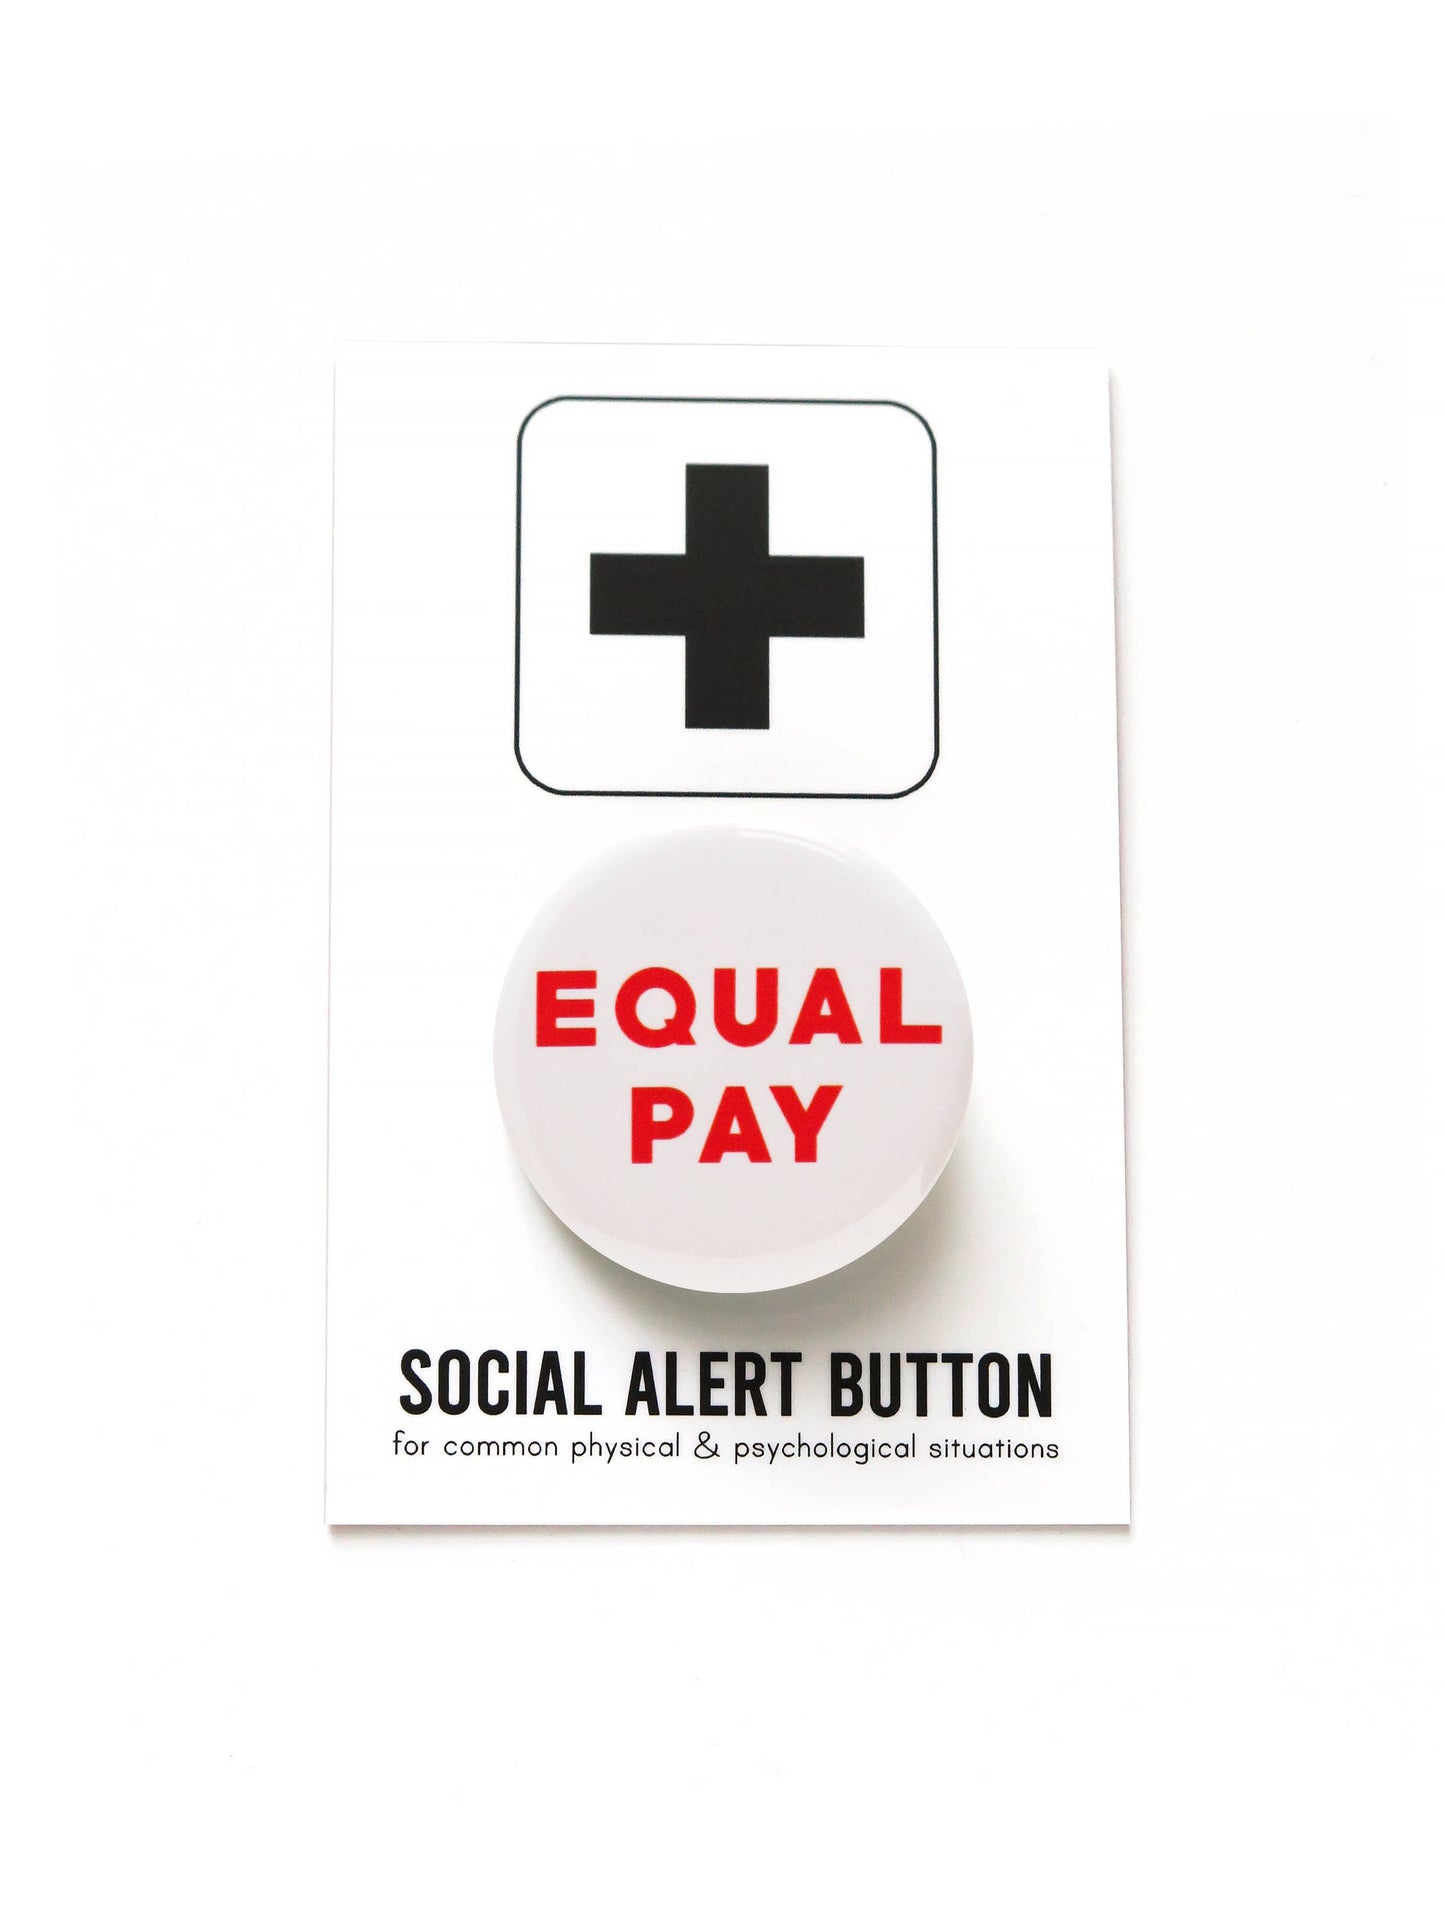 EQUAL PAY Pinback Button political social justice